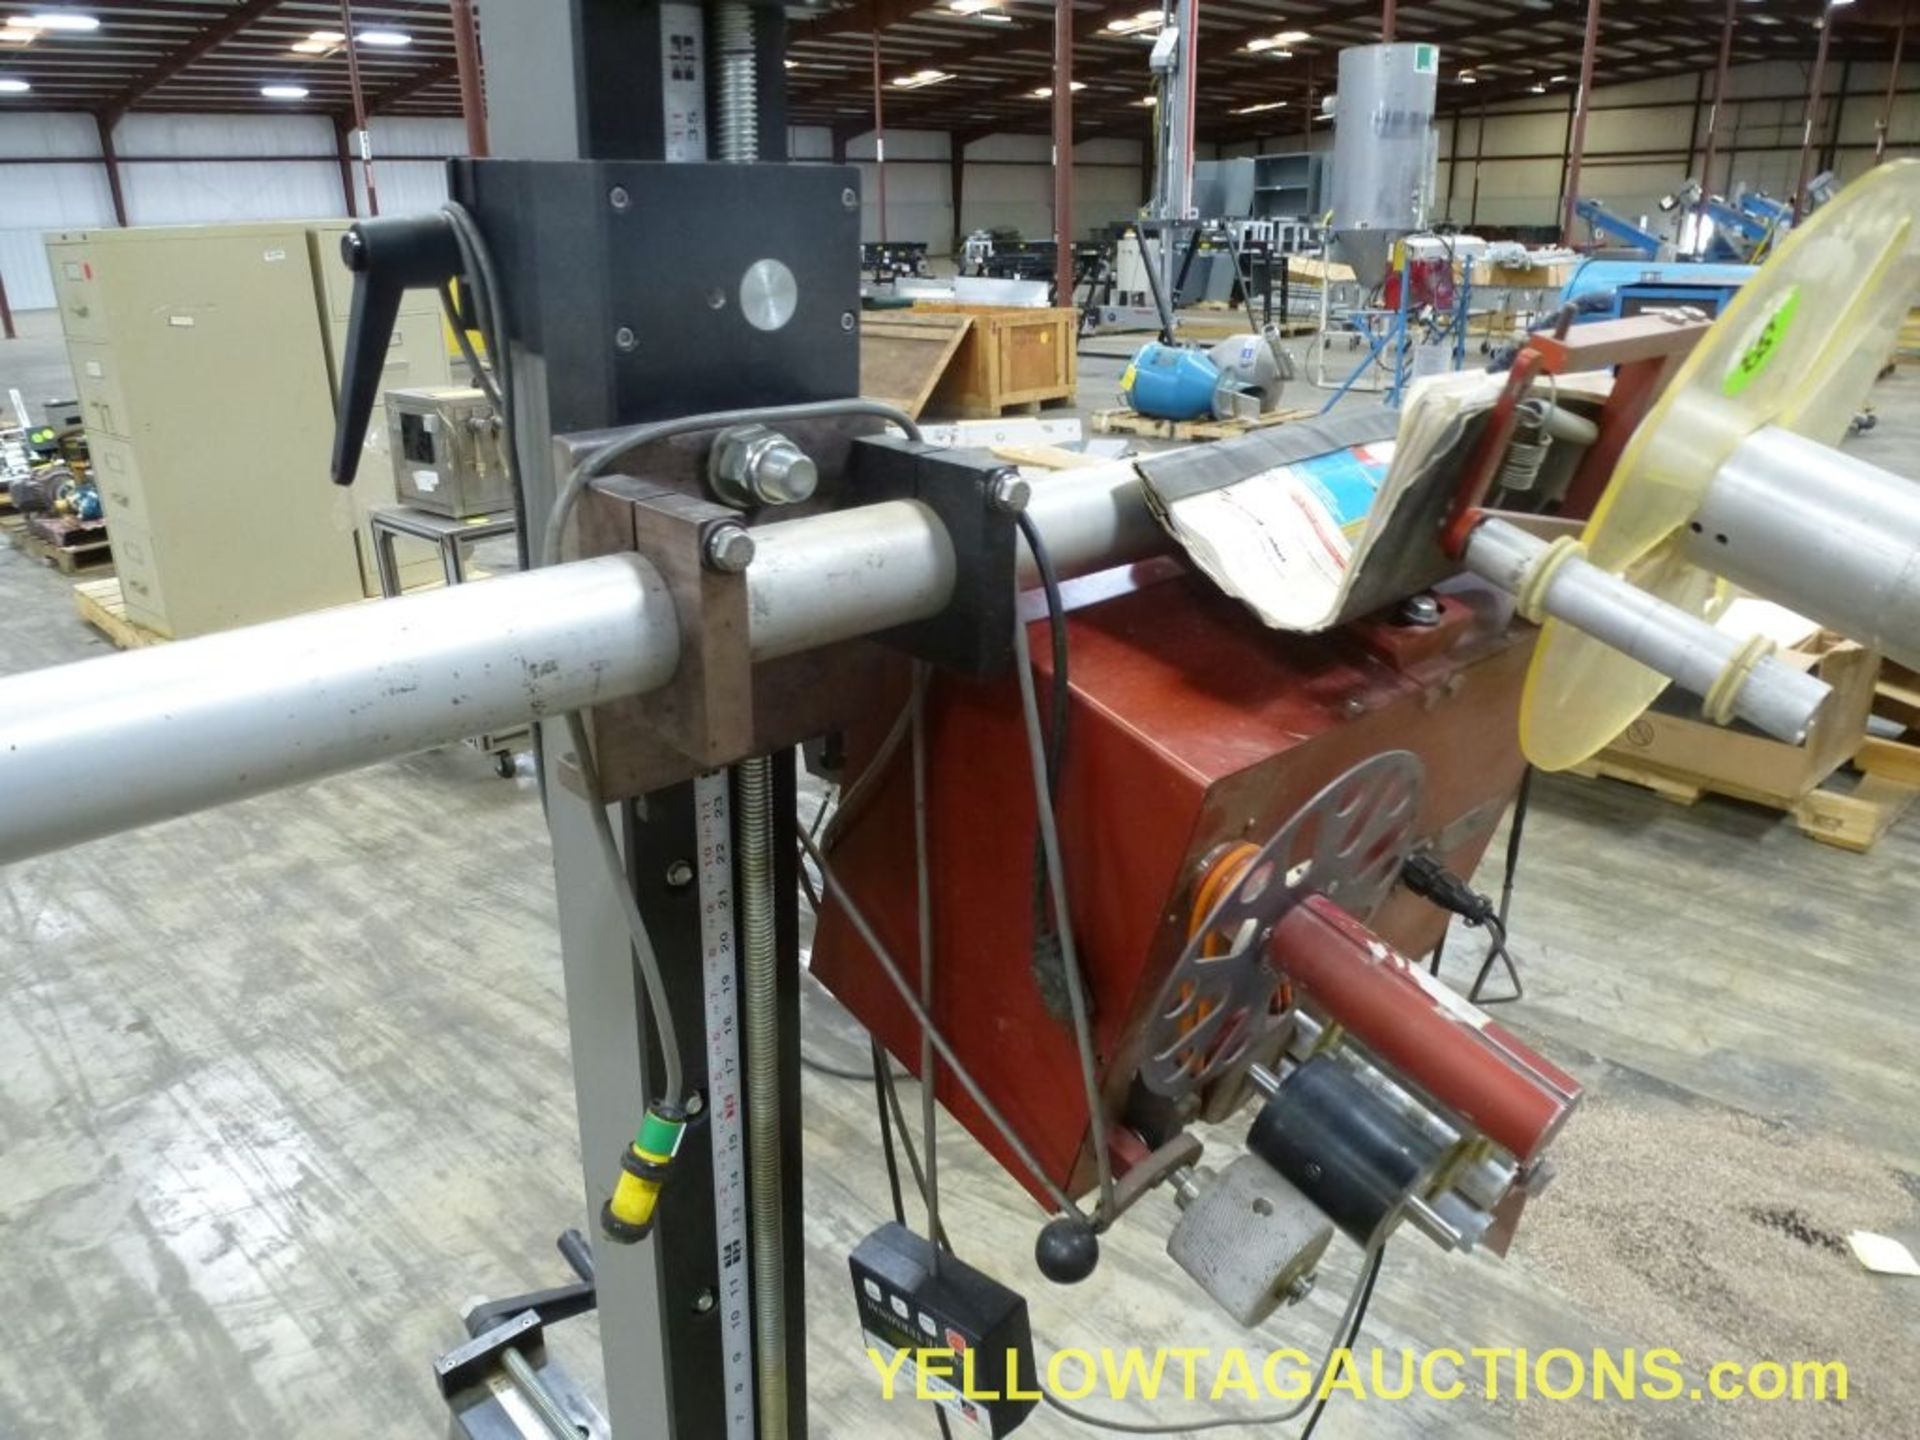 Label-Aire Label Winder/Applicator|Lot Loading Fee: $5.00 - Image 3 of 7